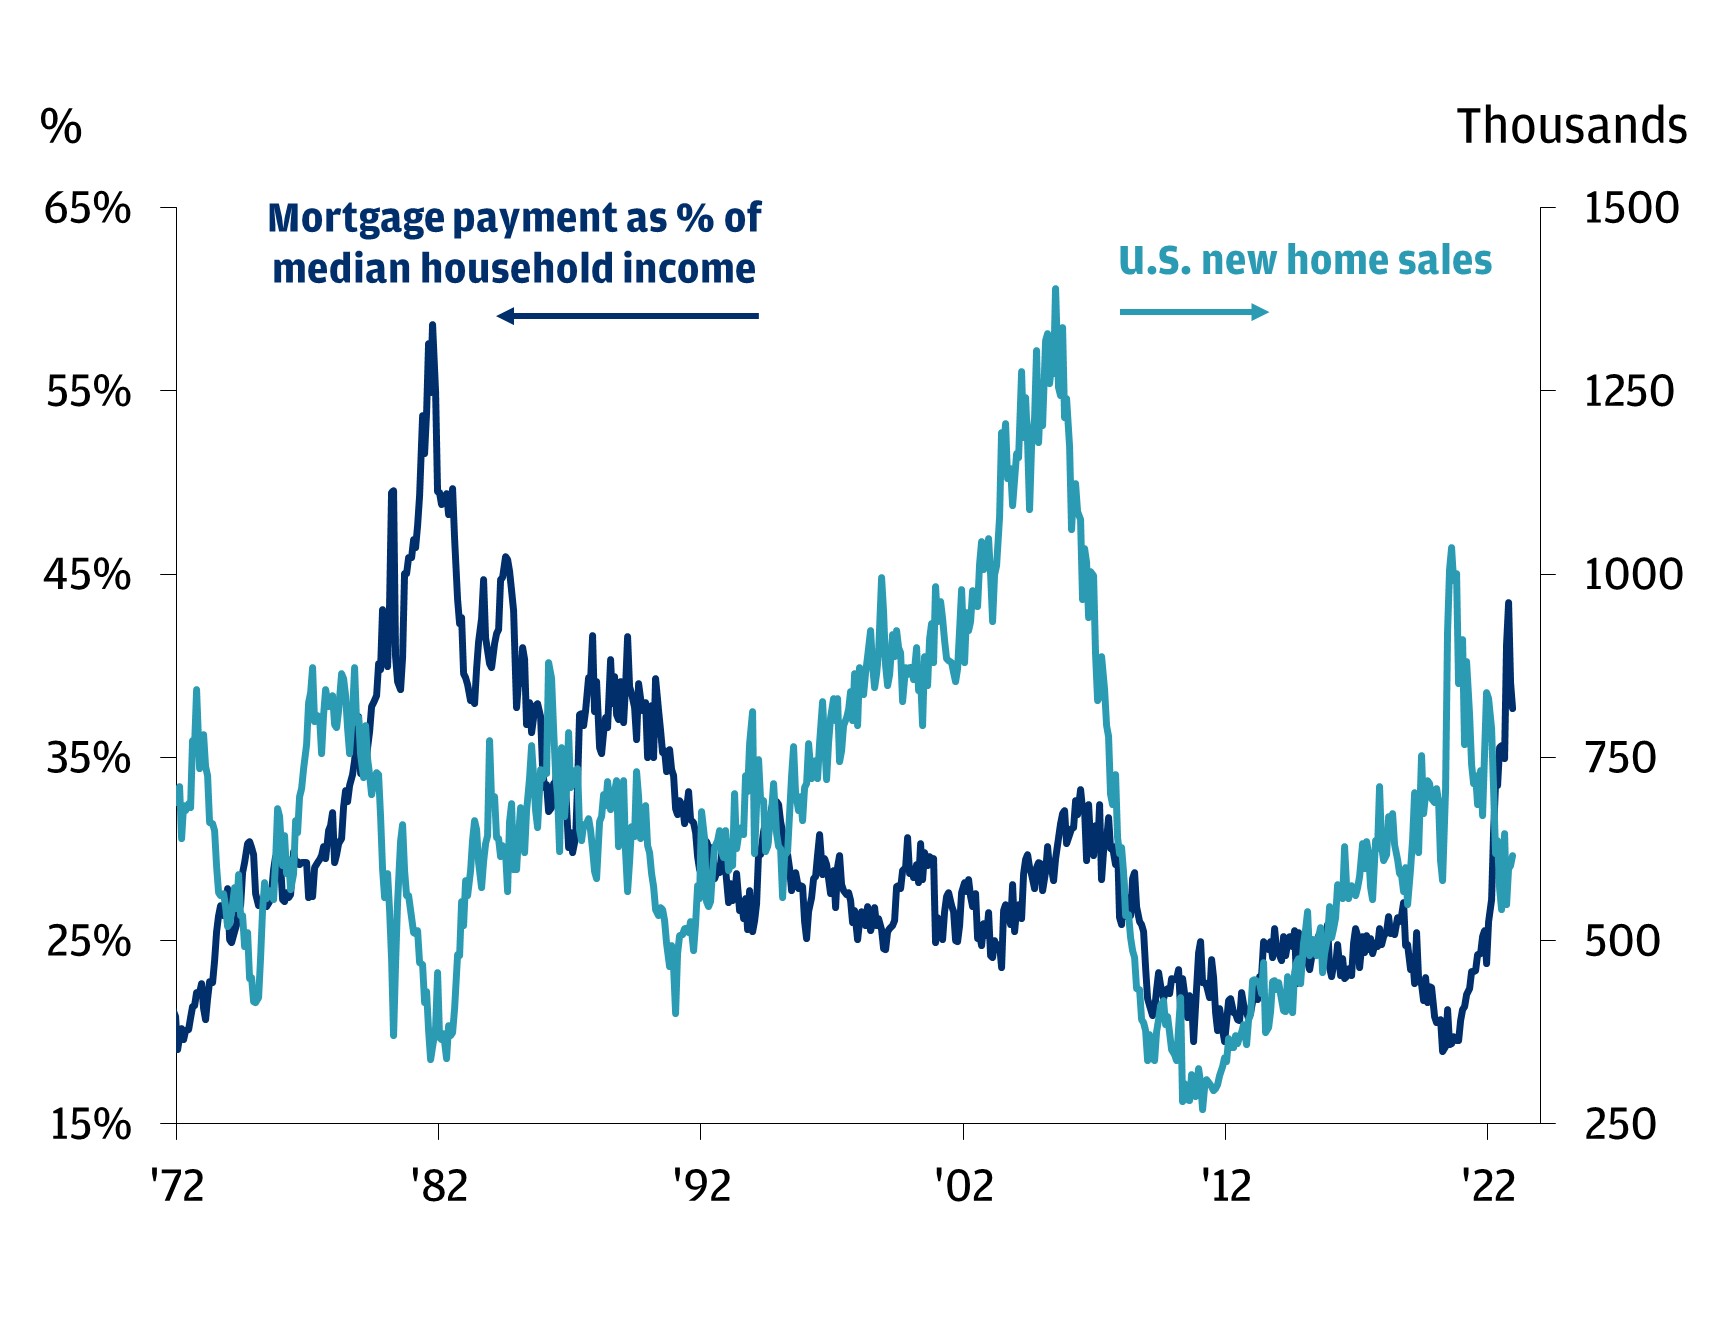 This chart shows an Americans mortgage payment as a % of median household income and U.S. new home sales (in thousands) from 1972 to 2022.